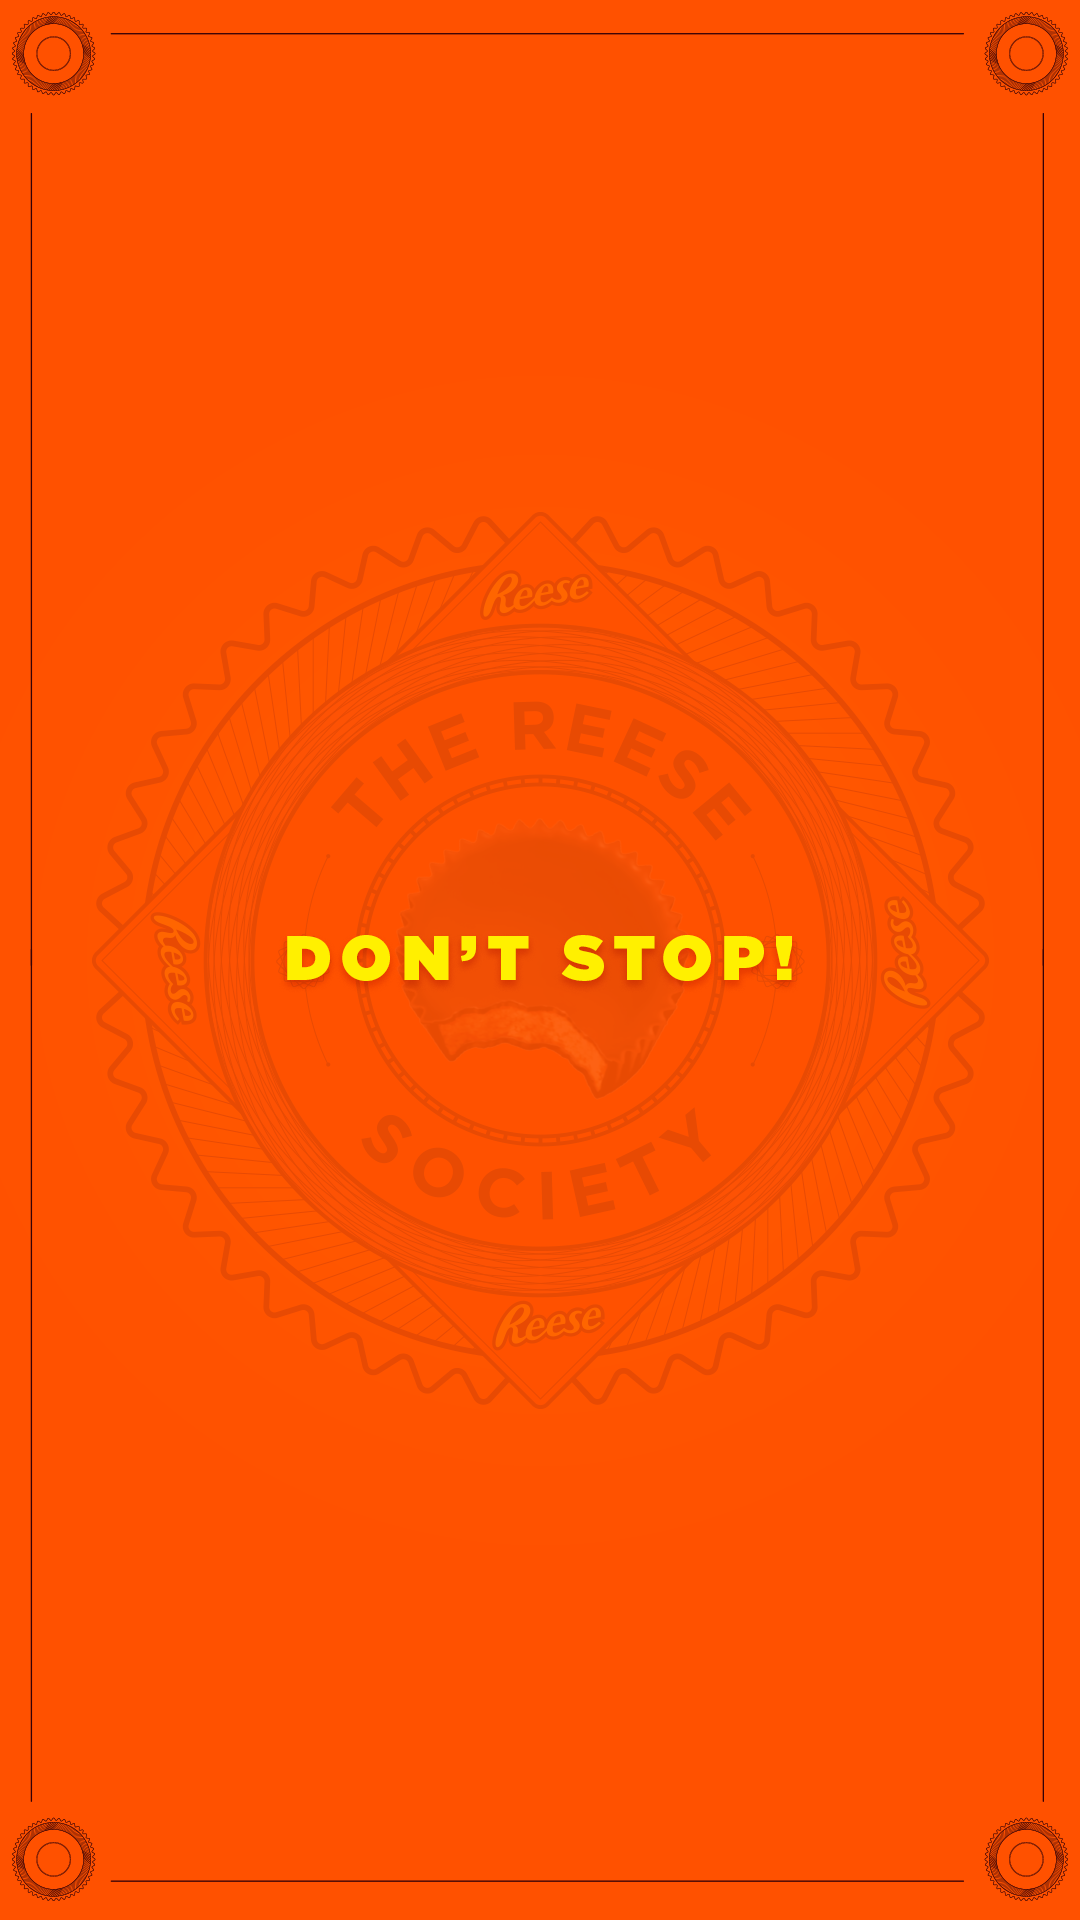 Reese-Society-IG_0092_Don’t-stop.png